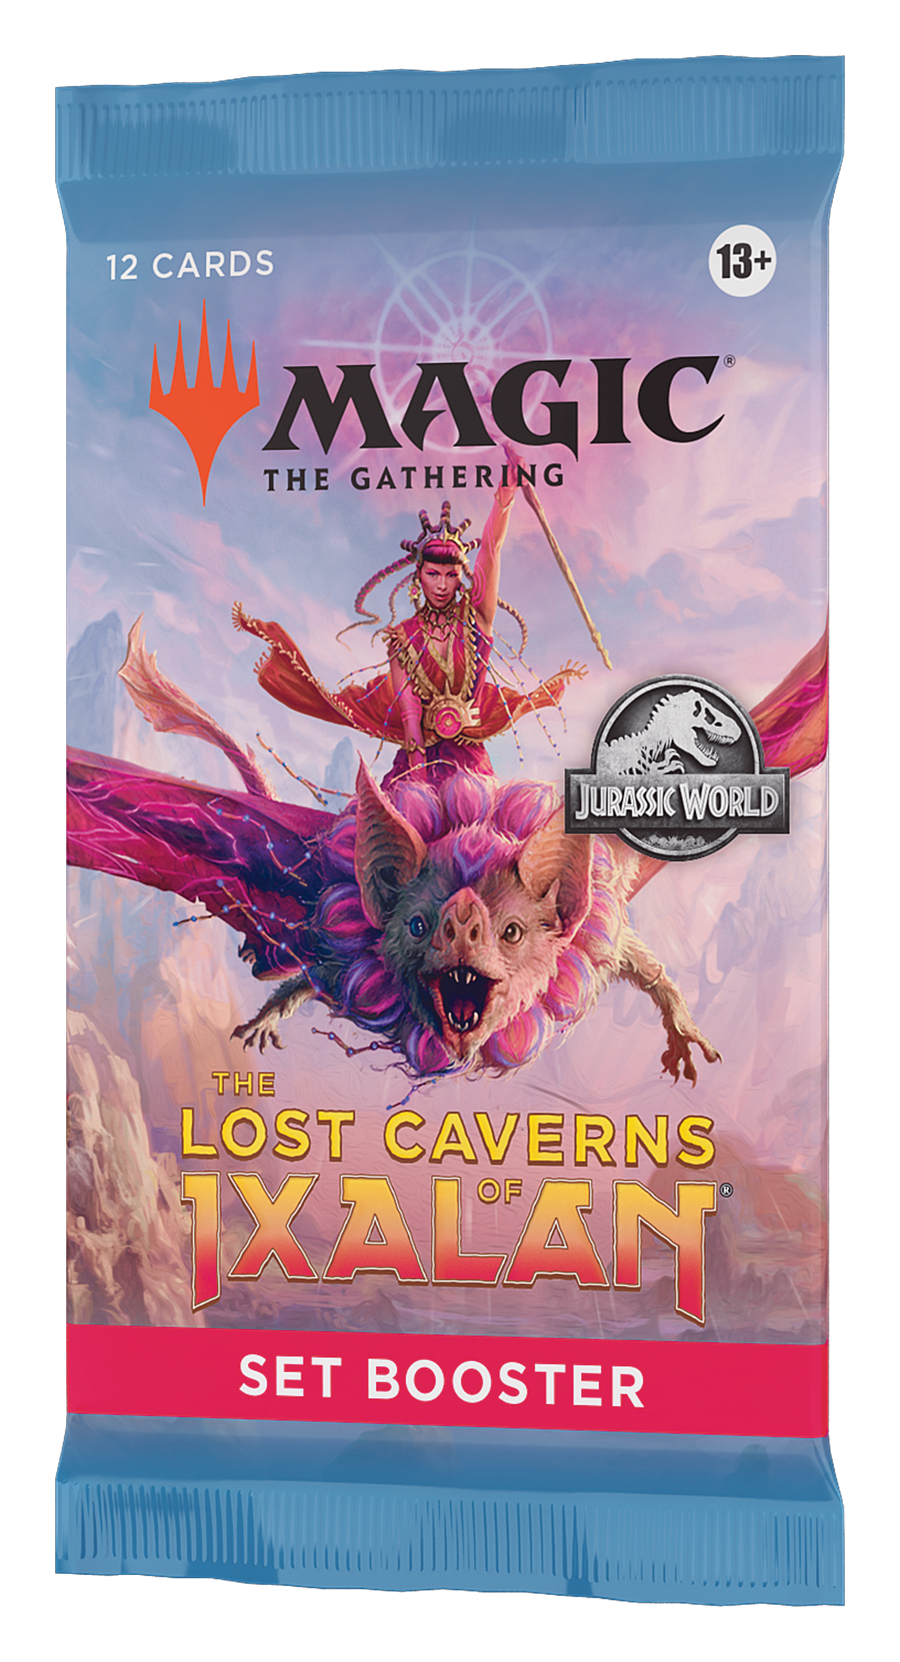 Wizards of the Coast Magic The Gathering - The Lost Caverns of Ixalan Set Booster